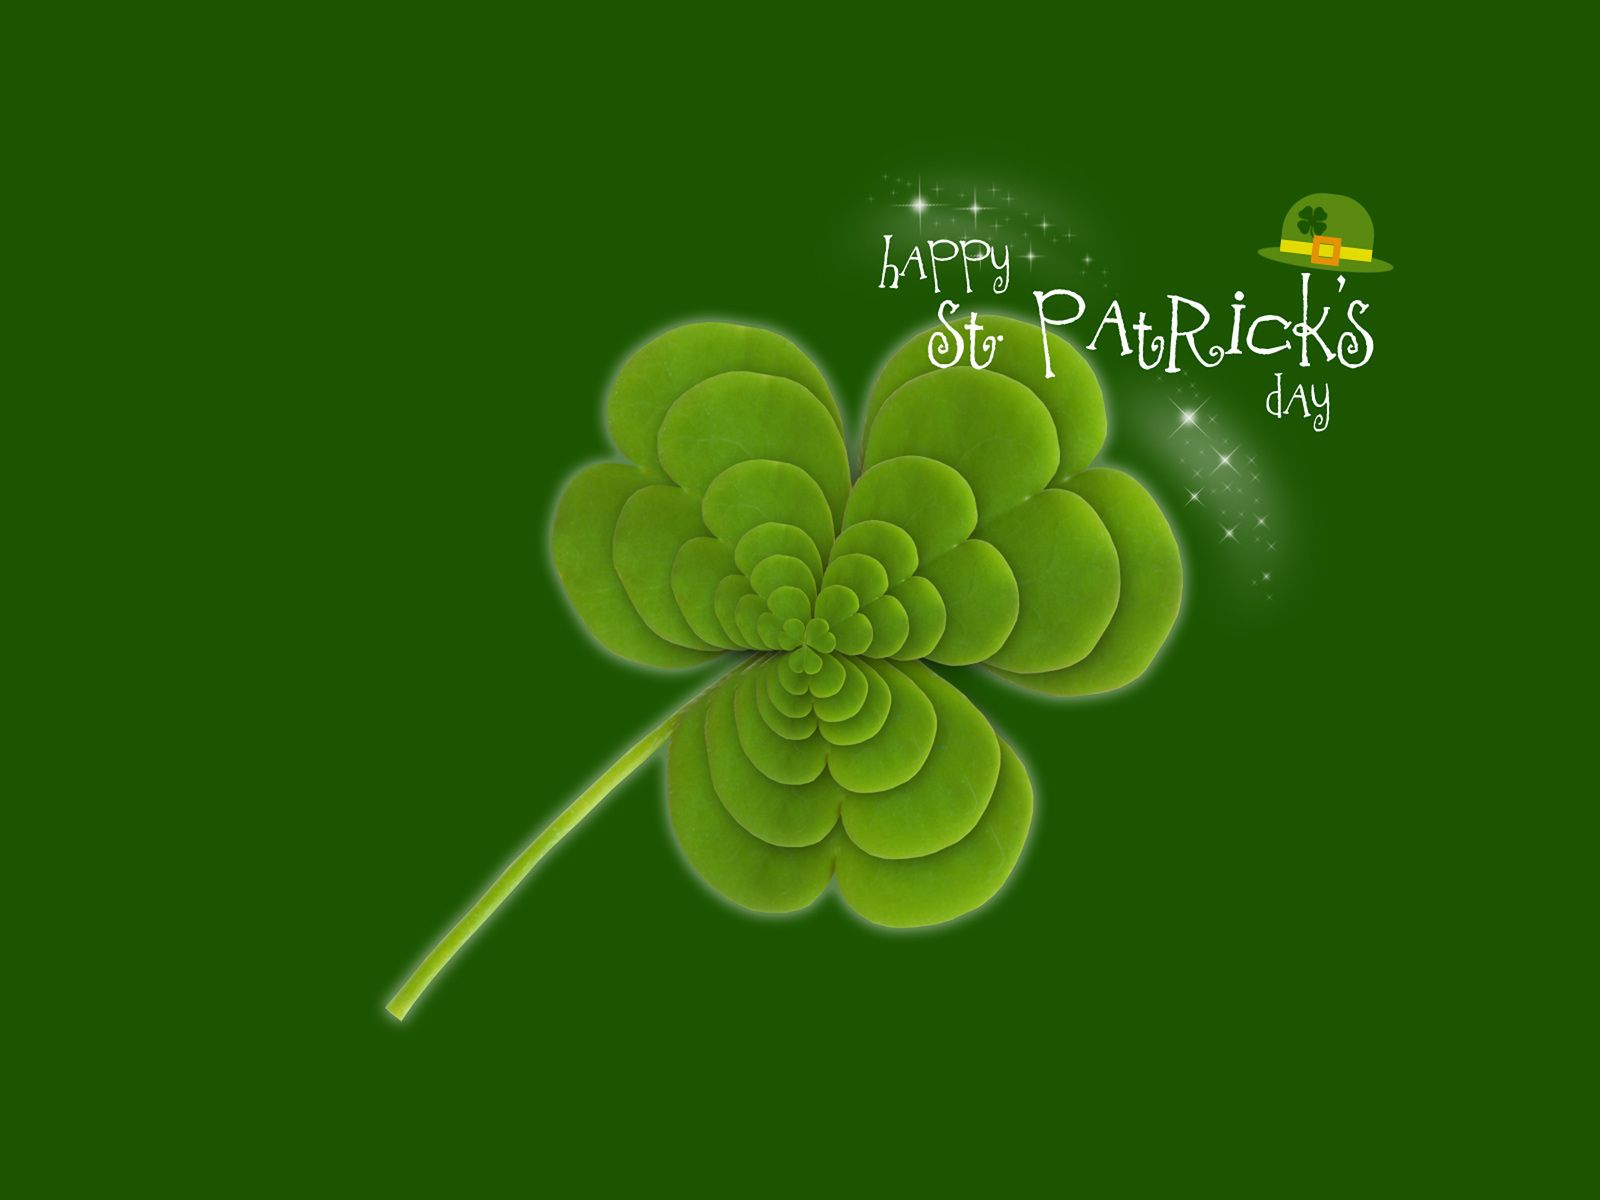 Happy St Patrick's Day Wishes Wallpaper